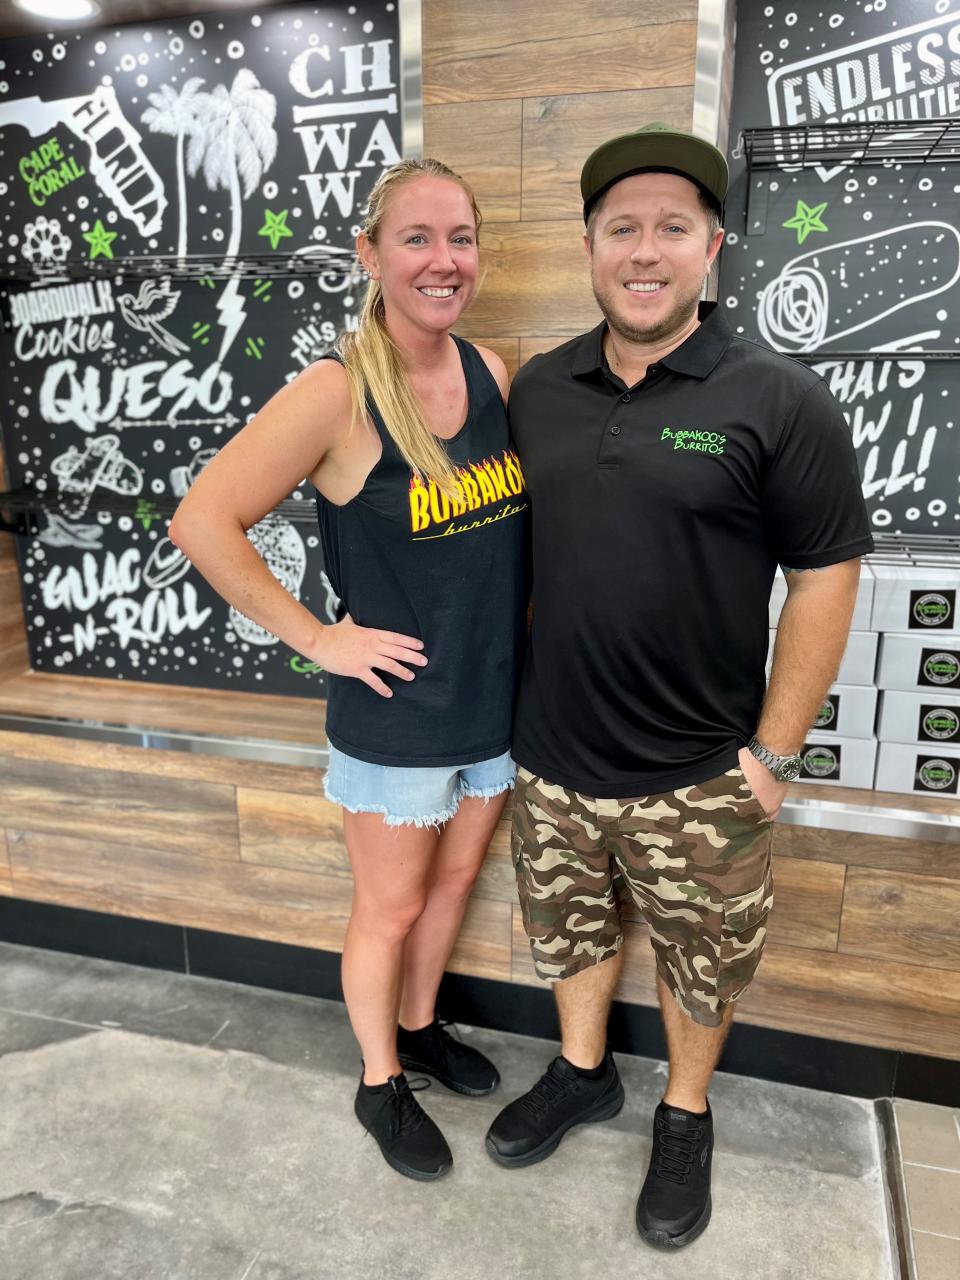 Taylor Bidinost, pictured with fiancée Christine Brenner, is the owner of Bubbakoo's Burritos in Cape Coral.